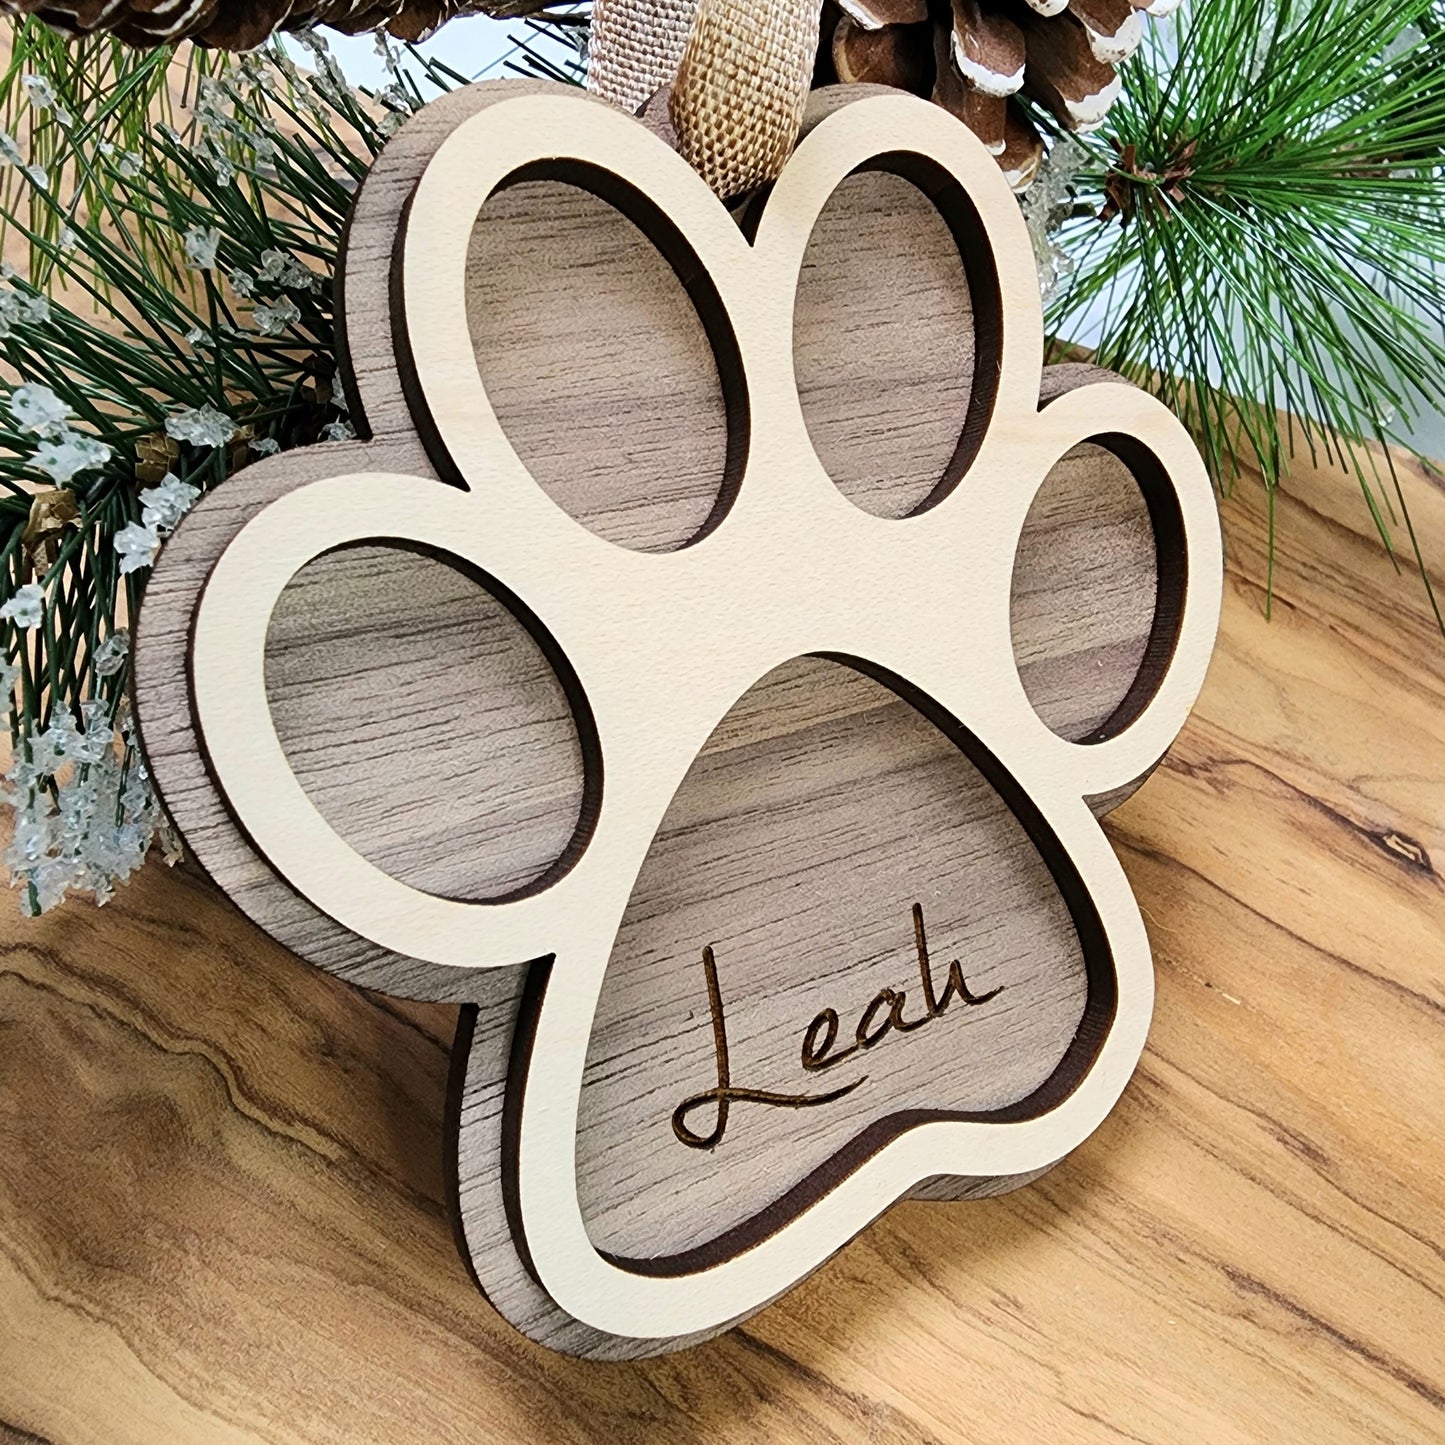 Cat Paw Ornament with Pet name engraved